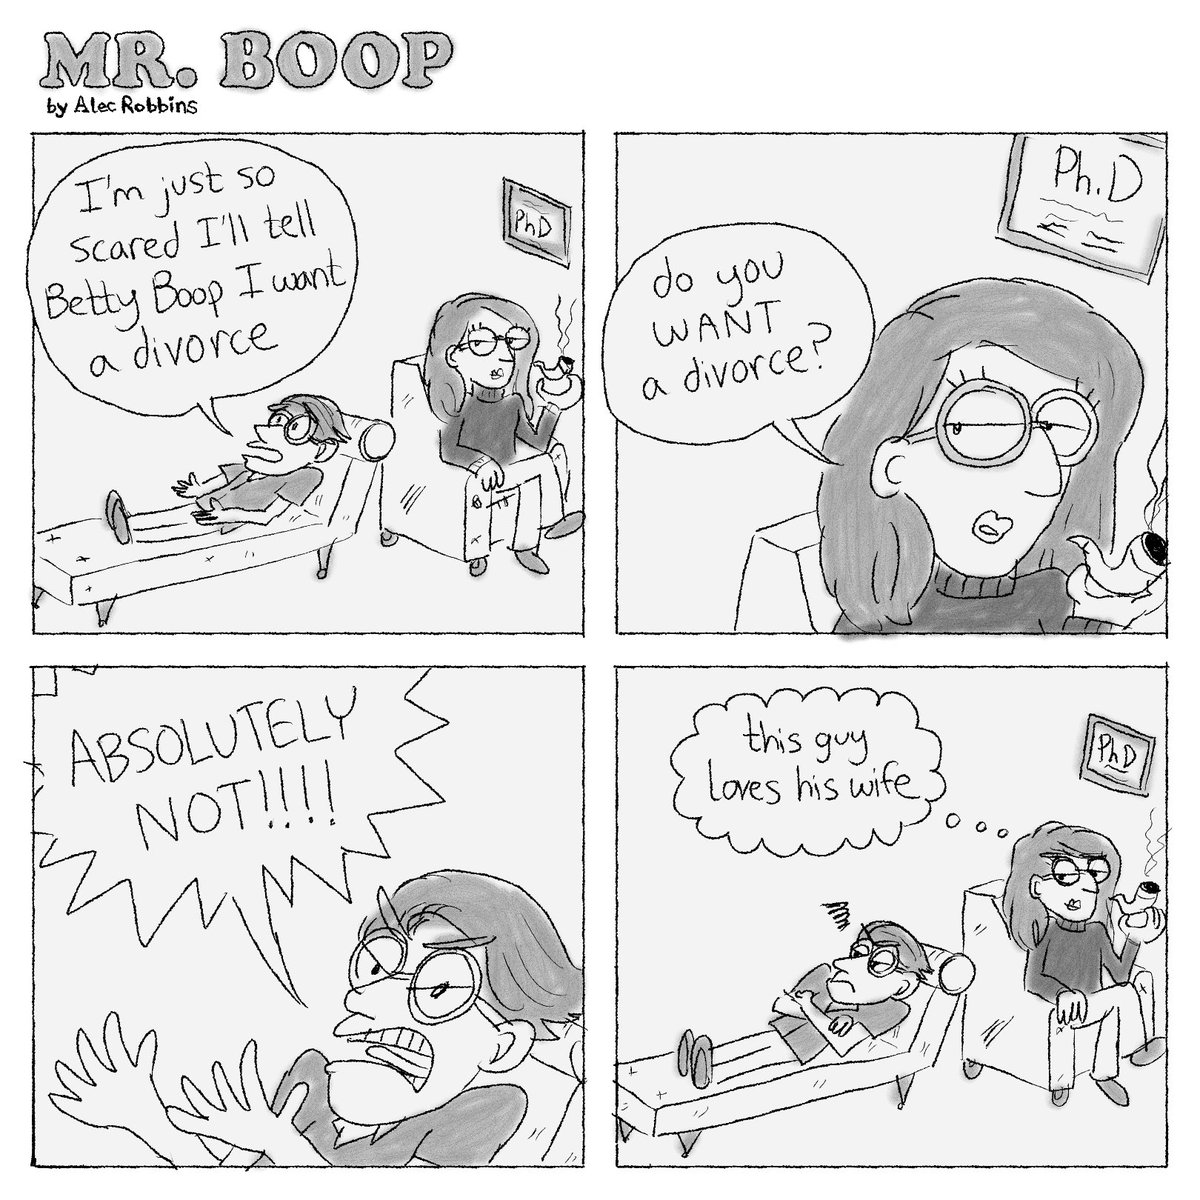 Mr. Boop goes to therapy